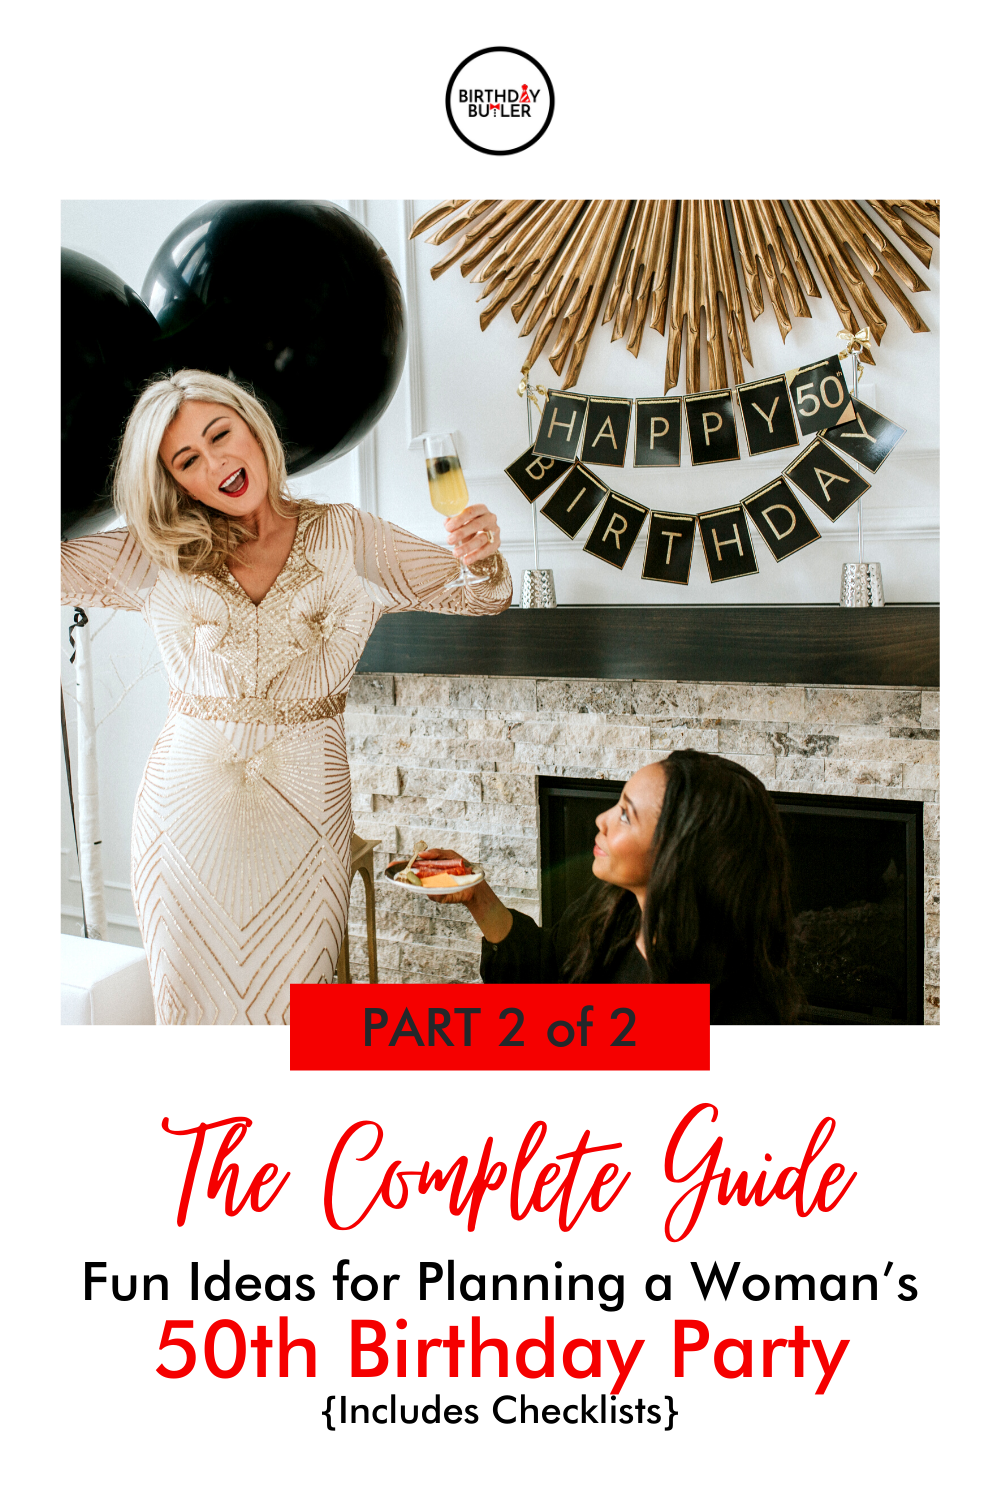 The Complete Guide: Fun Ideas for Planning a Woman’s 50th Birthday Party